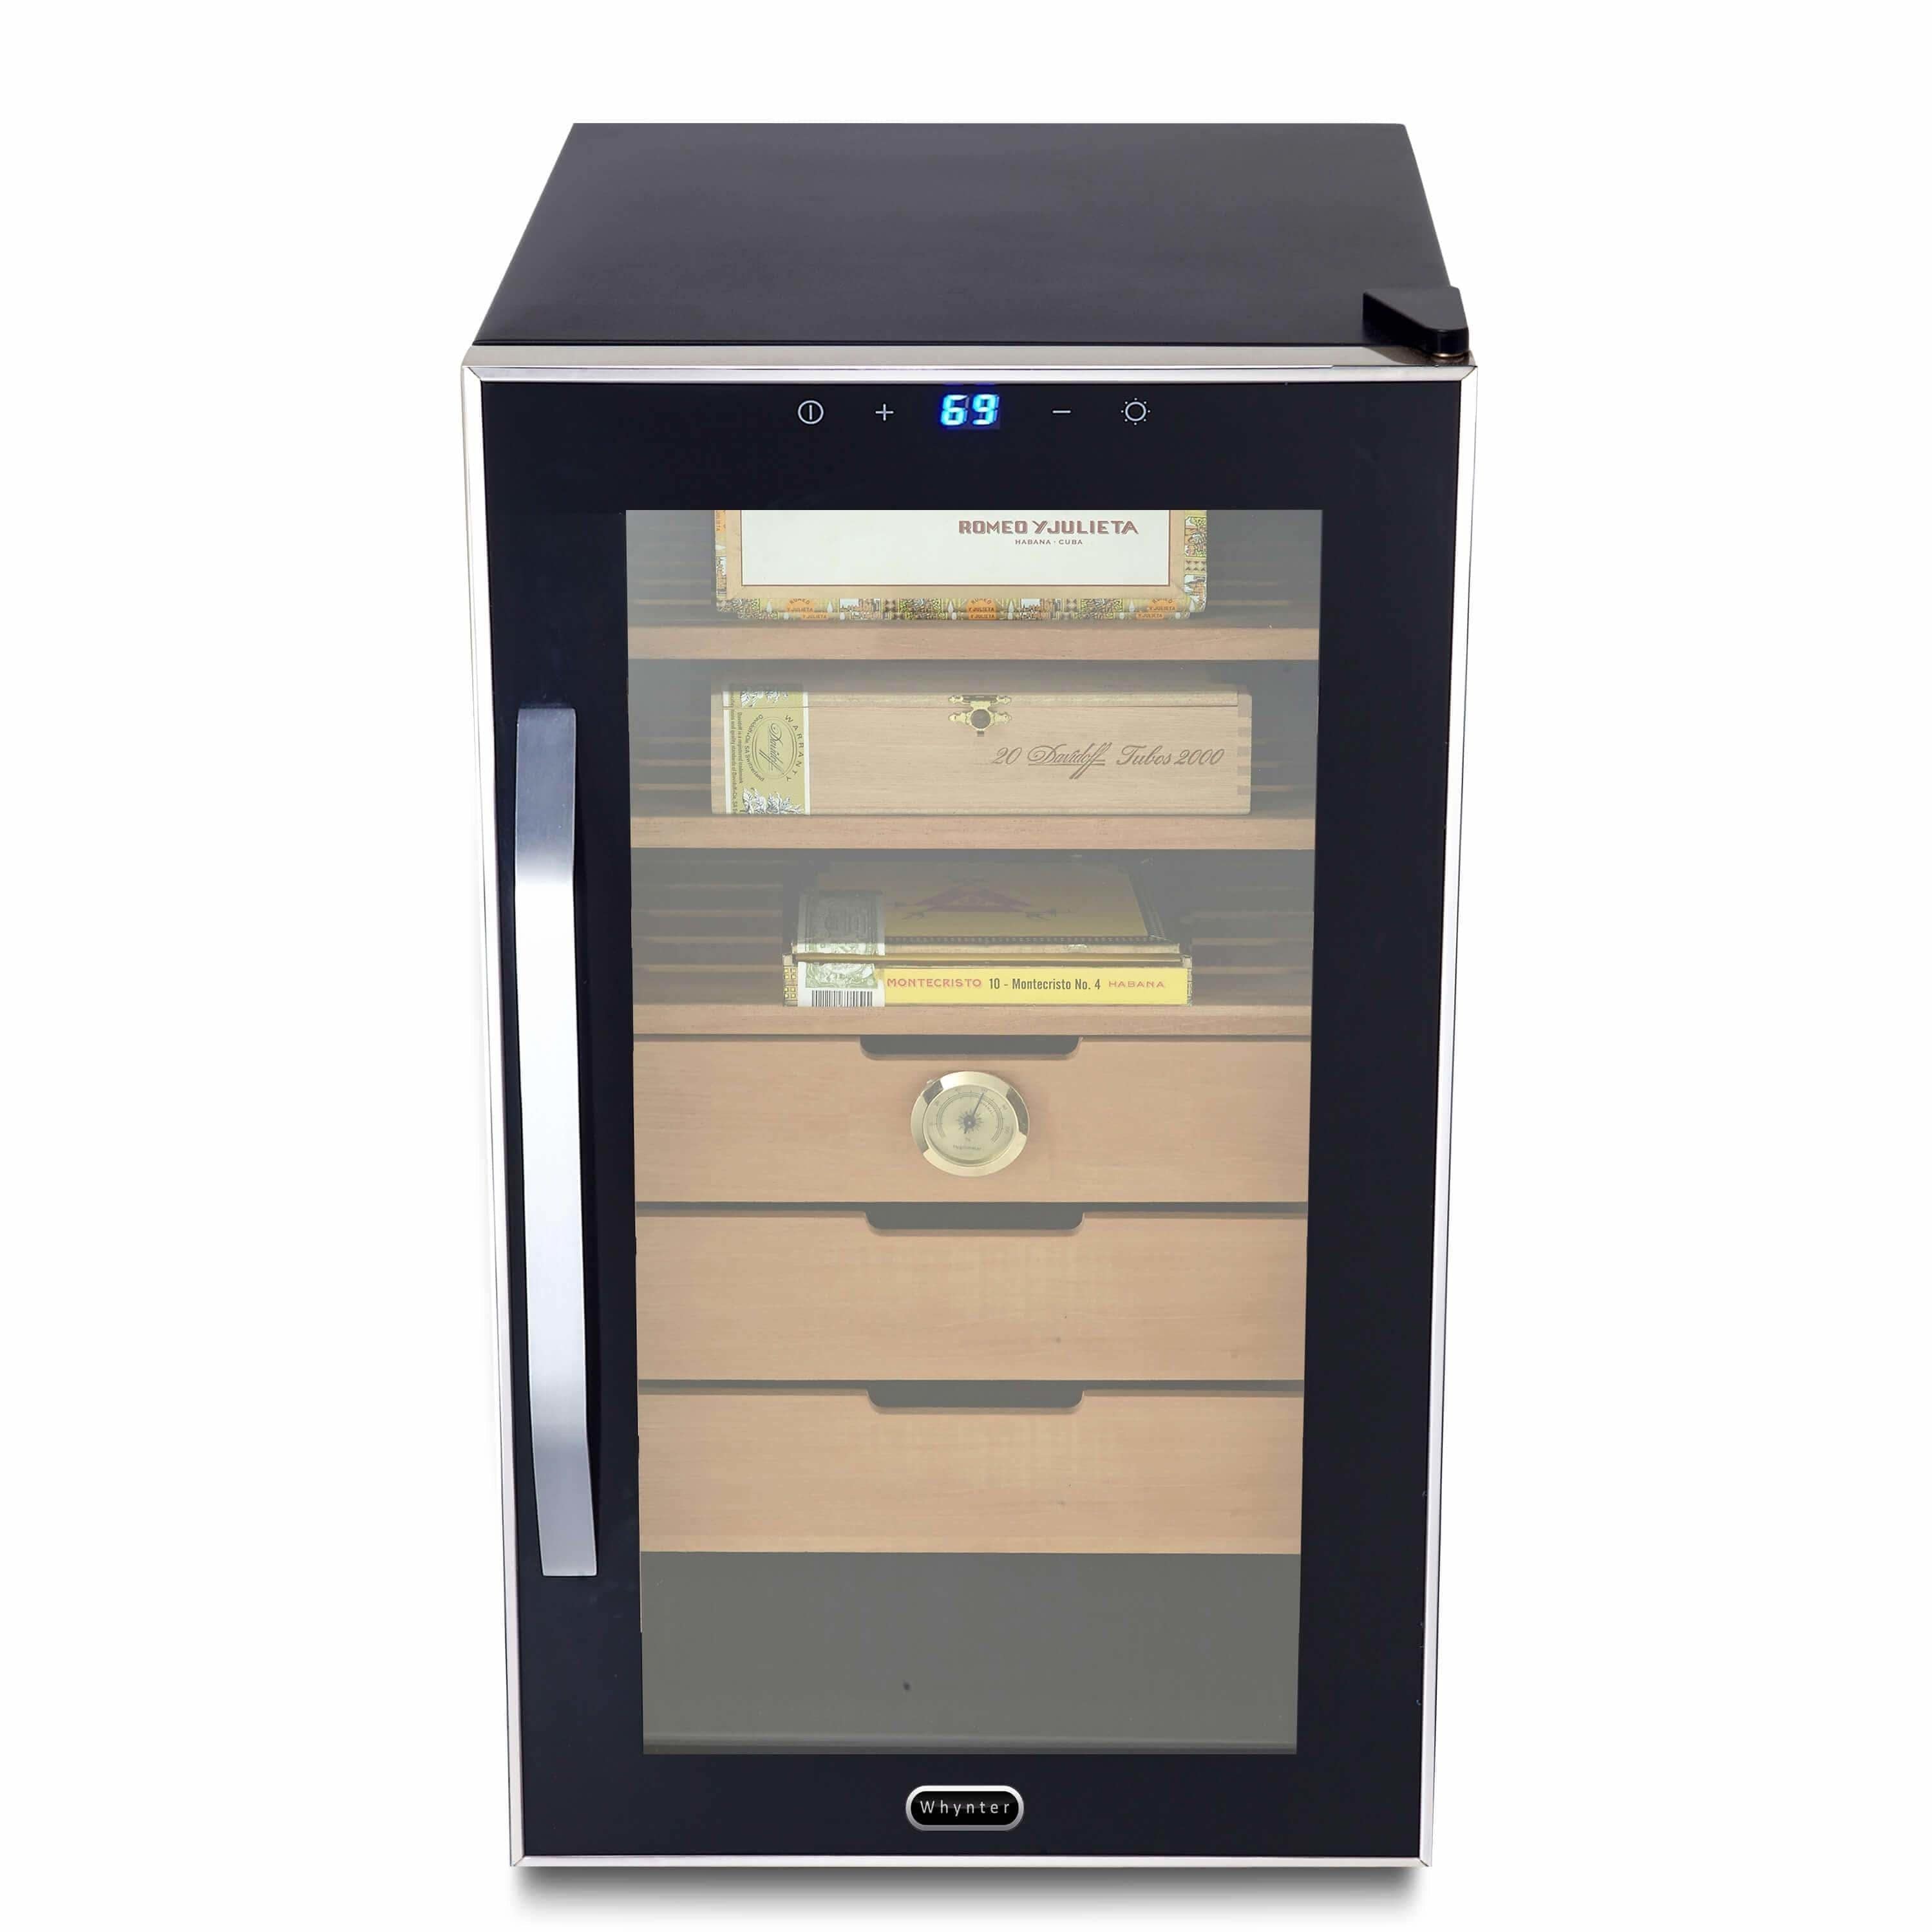 Whynter Elite Touch Control Stainless 1.8 cu.ft. Cigar Cooler Humidor CHC-172BD Wine Coolers Empire